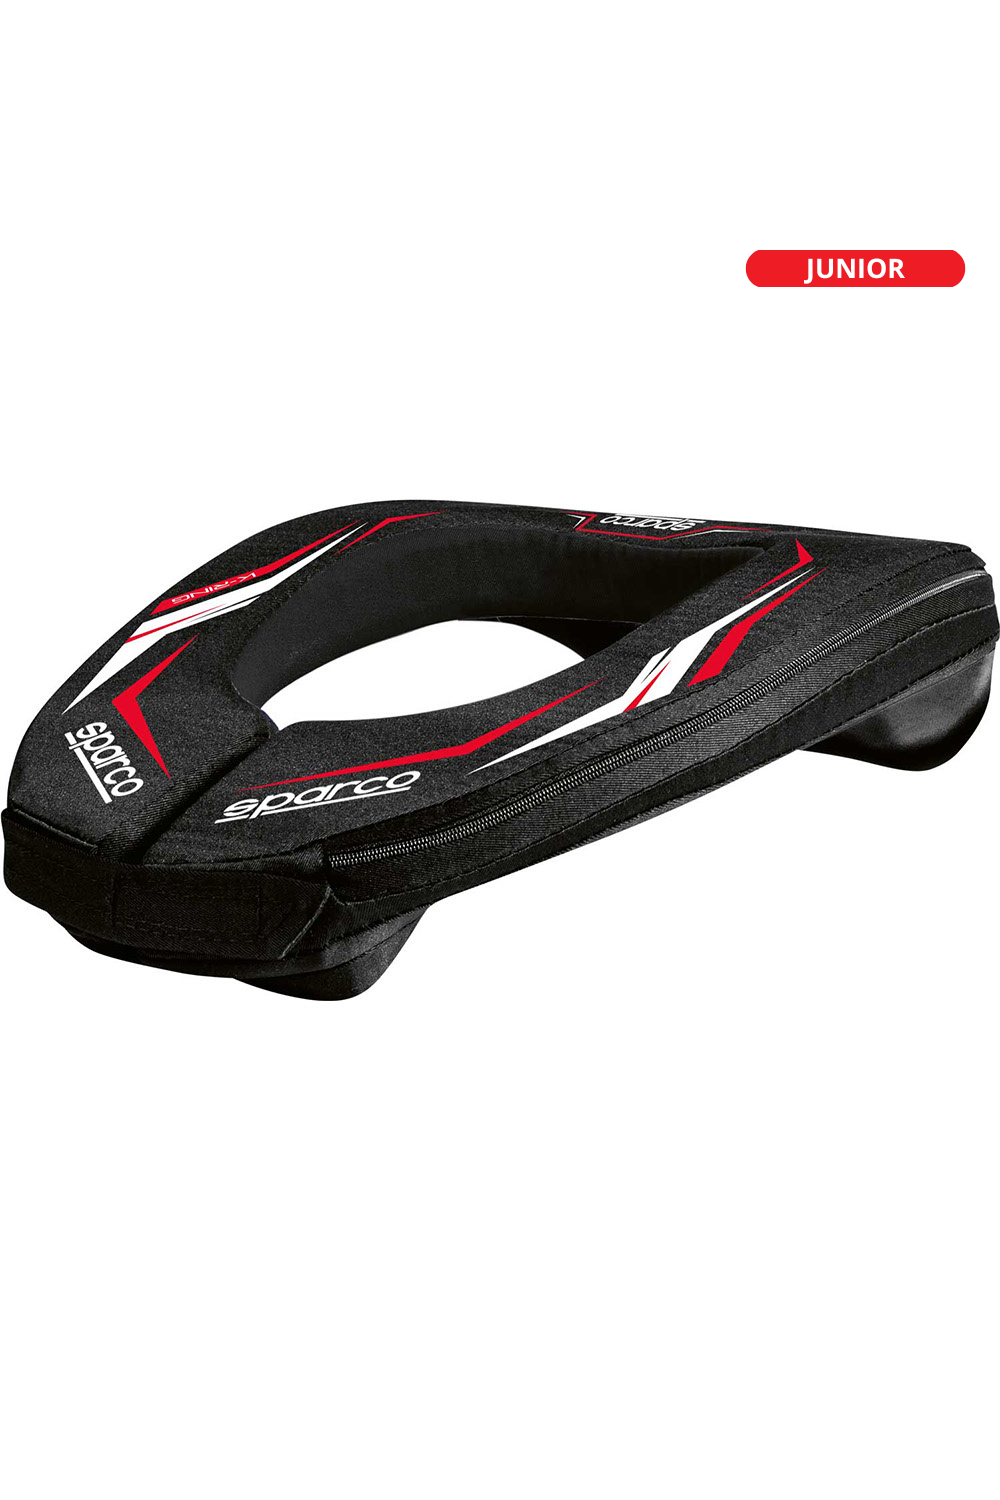 Sparco K-Ring | Junior | Neck Protection | Black Red White 